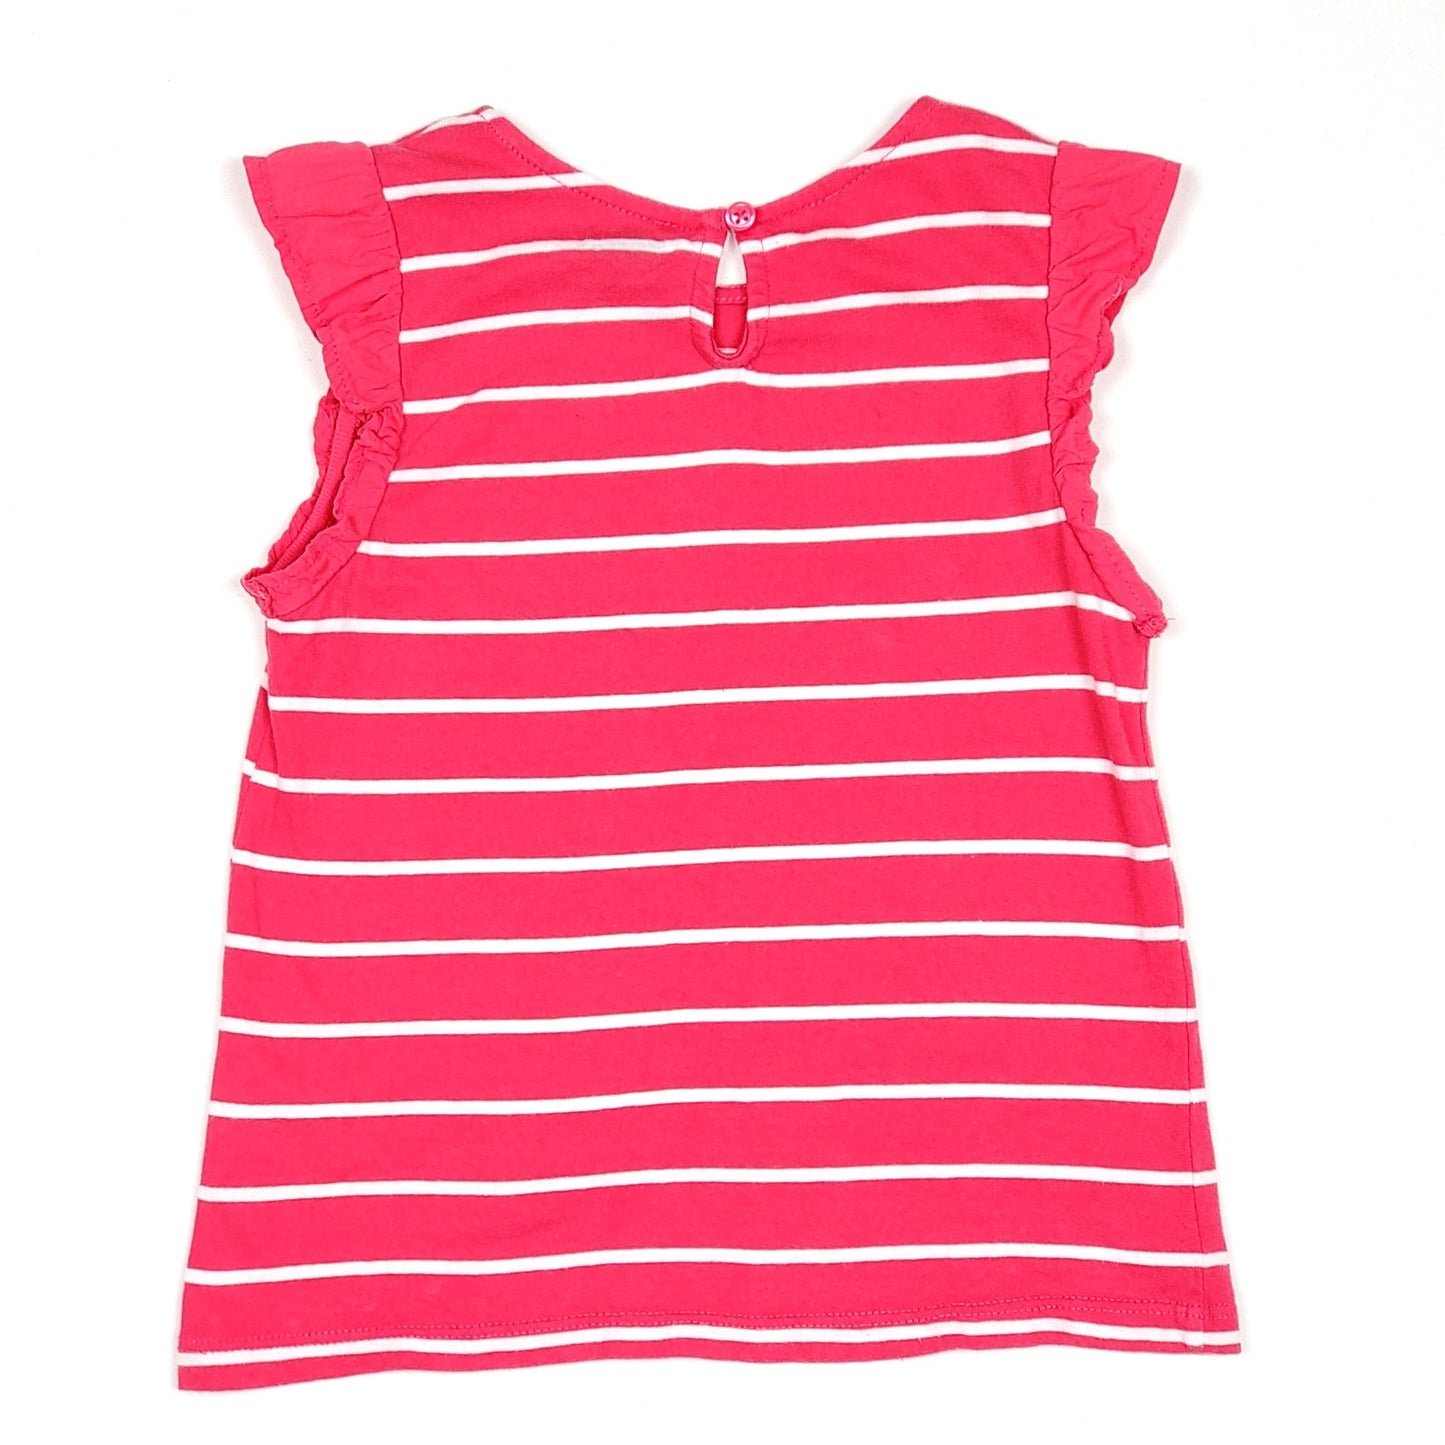 Crazy 8 Girls Pink White Striped Top 3T Used View 2